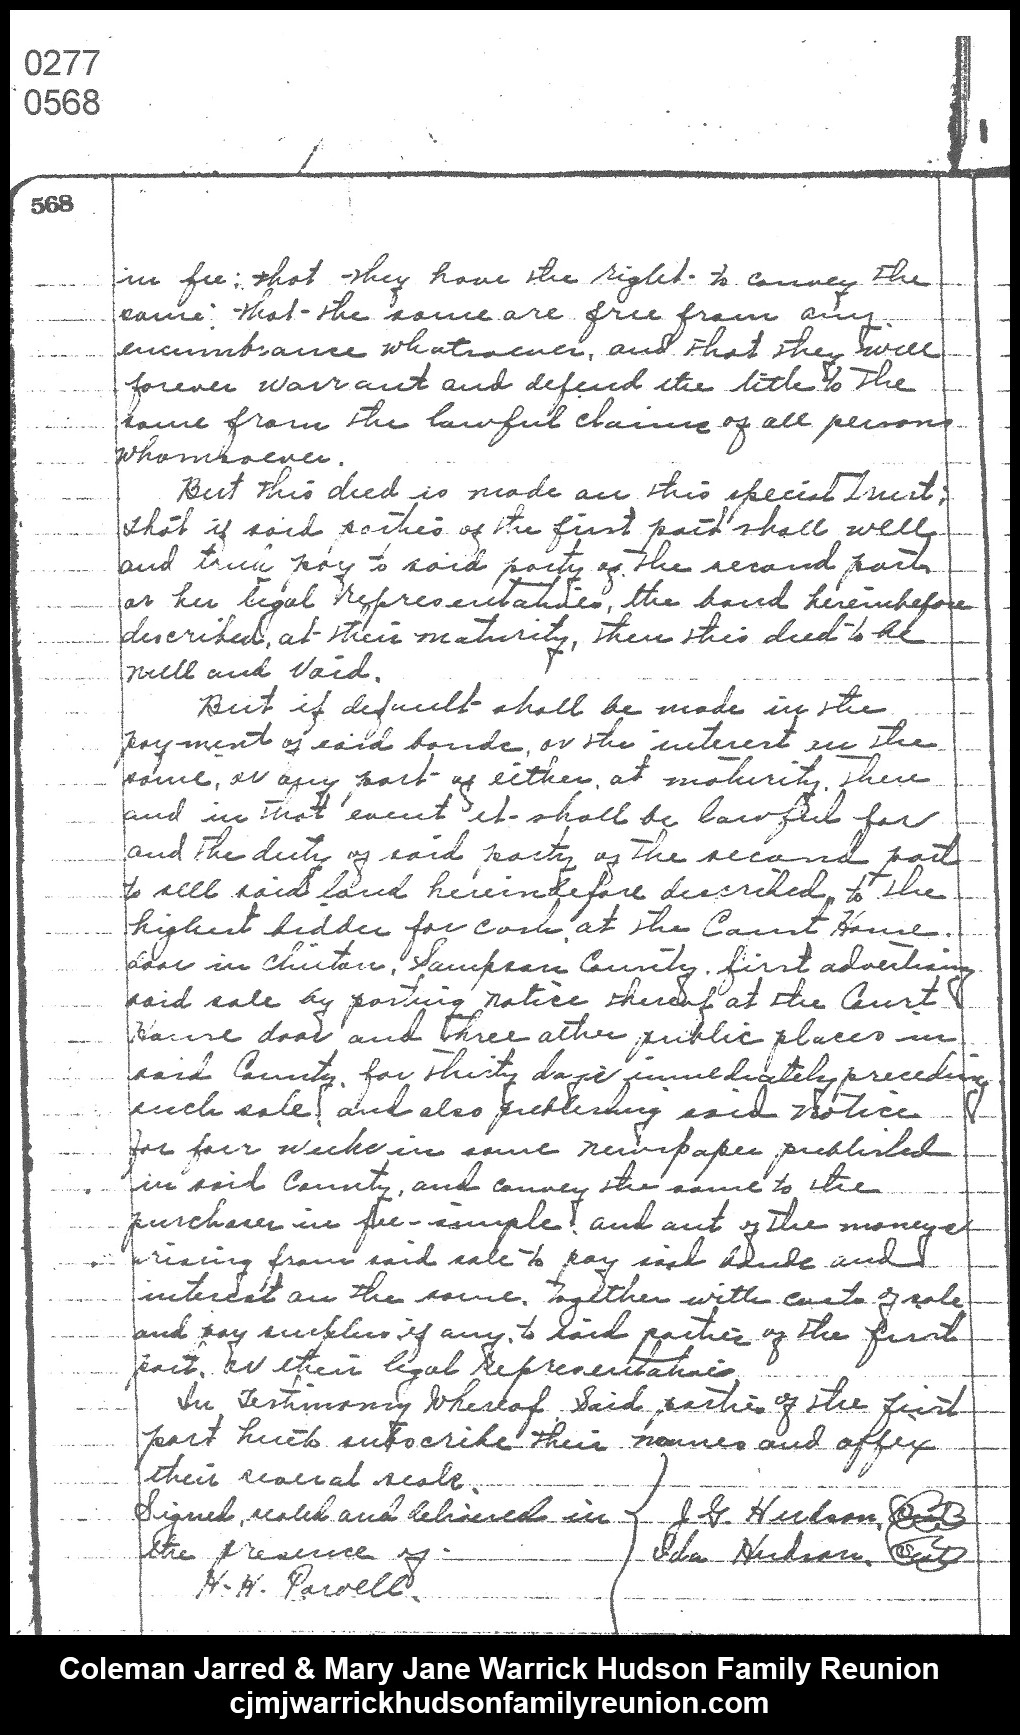 1916, 6-17 - Deed - Joel G. Hudson & wife to MJ (page 3 of 4)